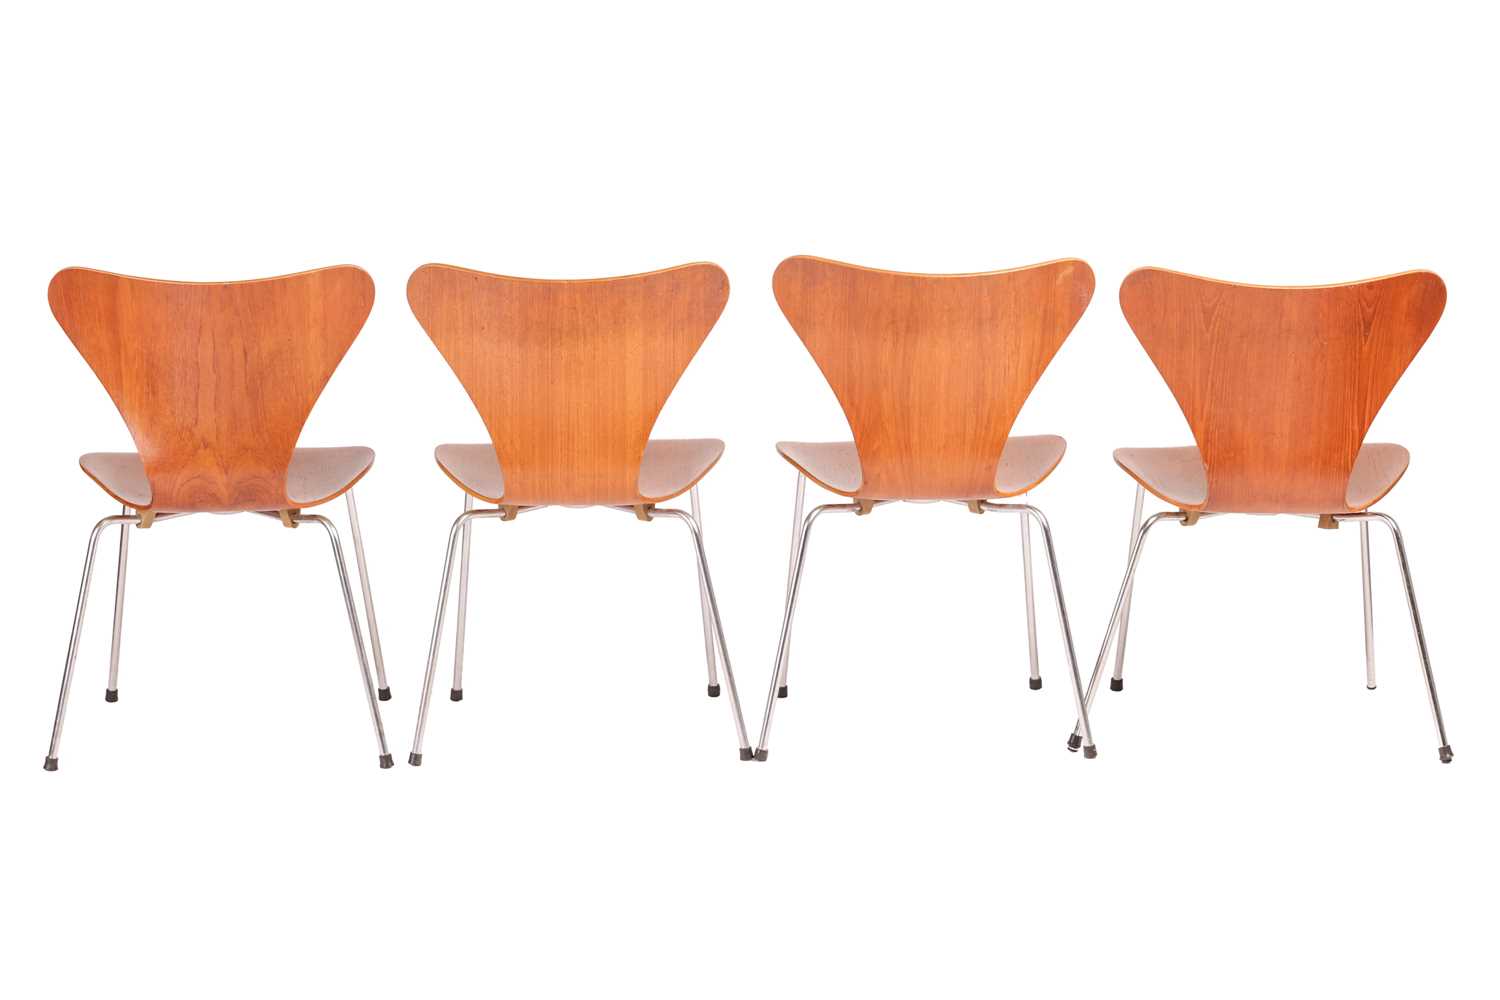 Arne Jacobsen for Fritz Hansen, set of four Sjuan chairs with laminated teak shell and chrome - Image 2 of 7